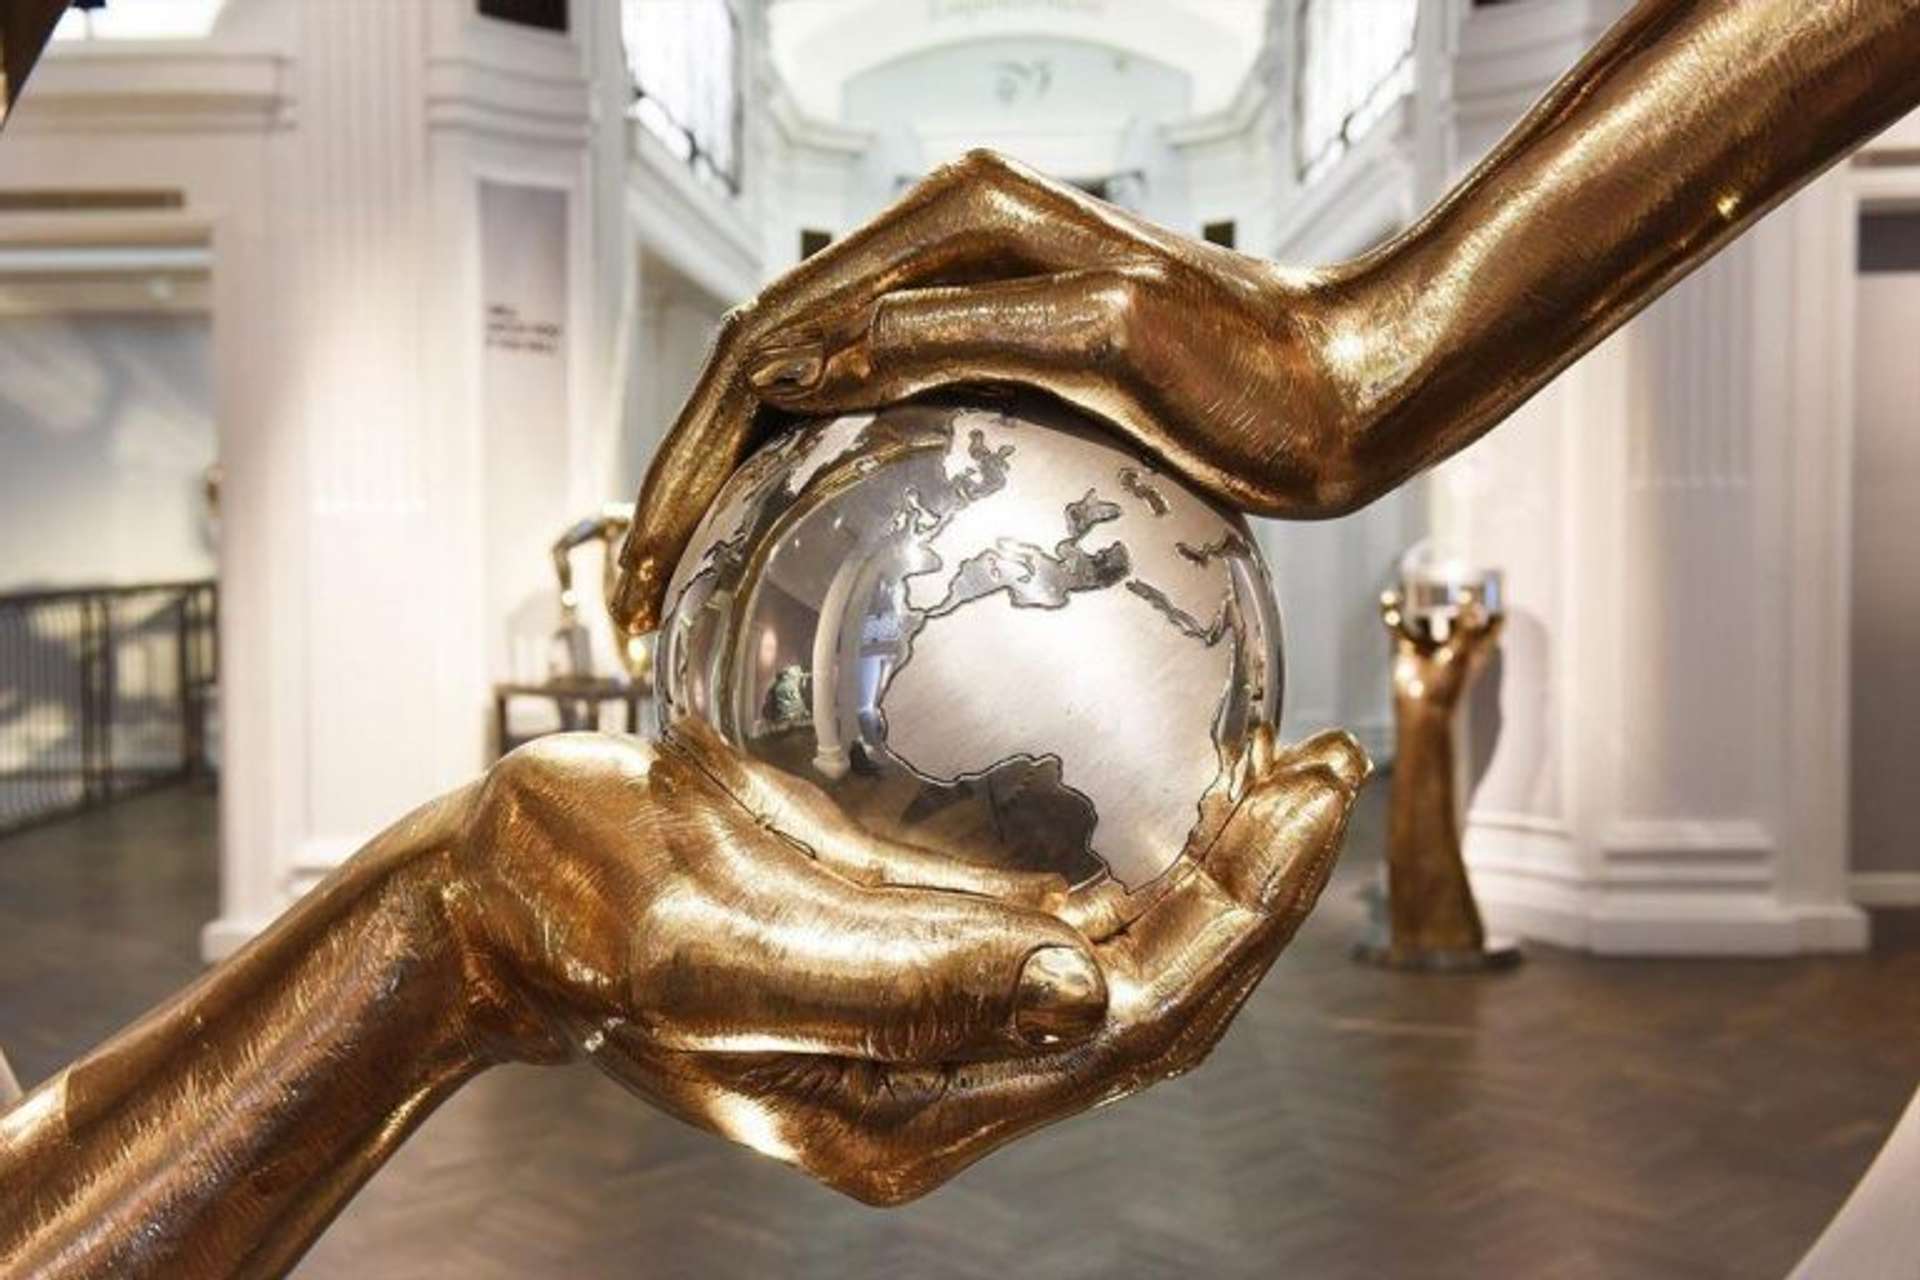 A sculpture titled "Empowerment" featuring two oversized hands emerging from a block of marble or stone, one hand supporting the other in a gesture of strength and support.